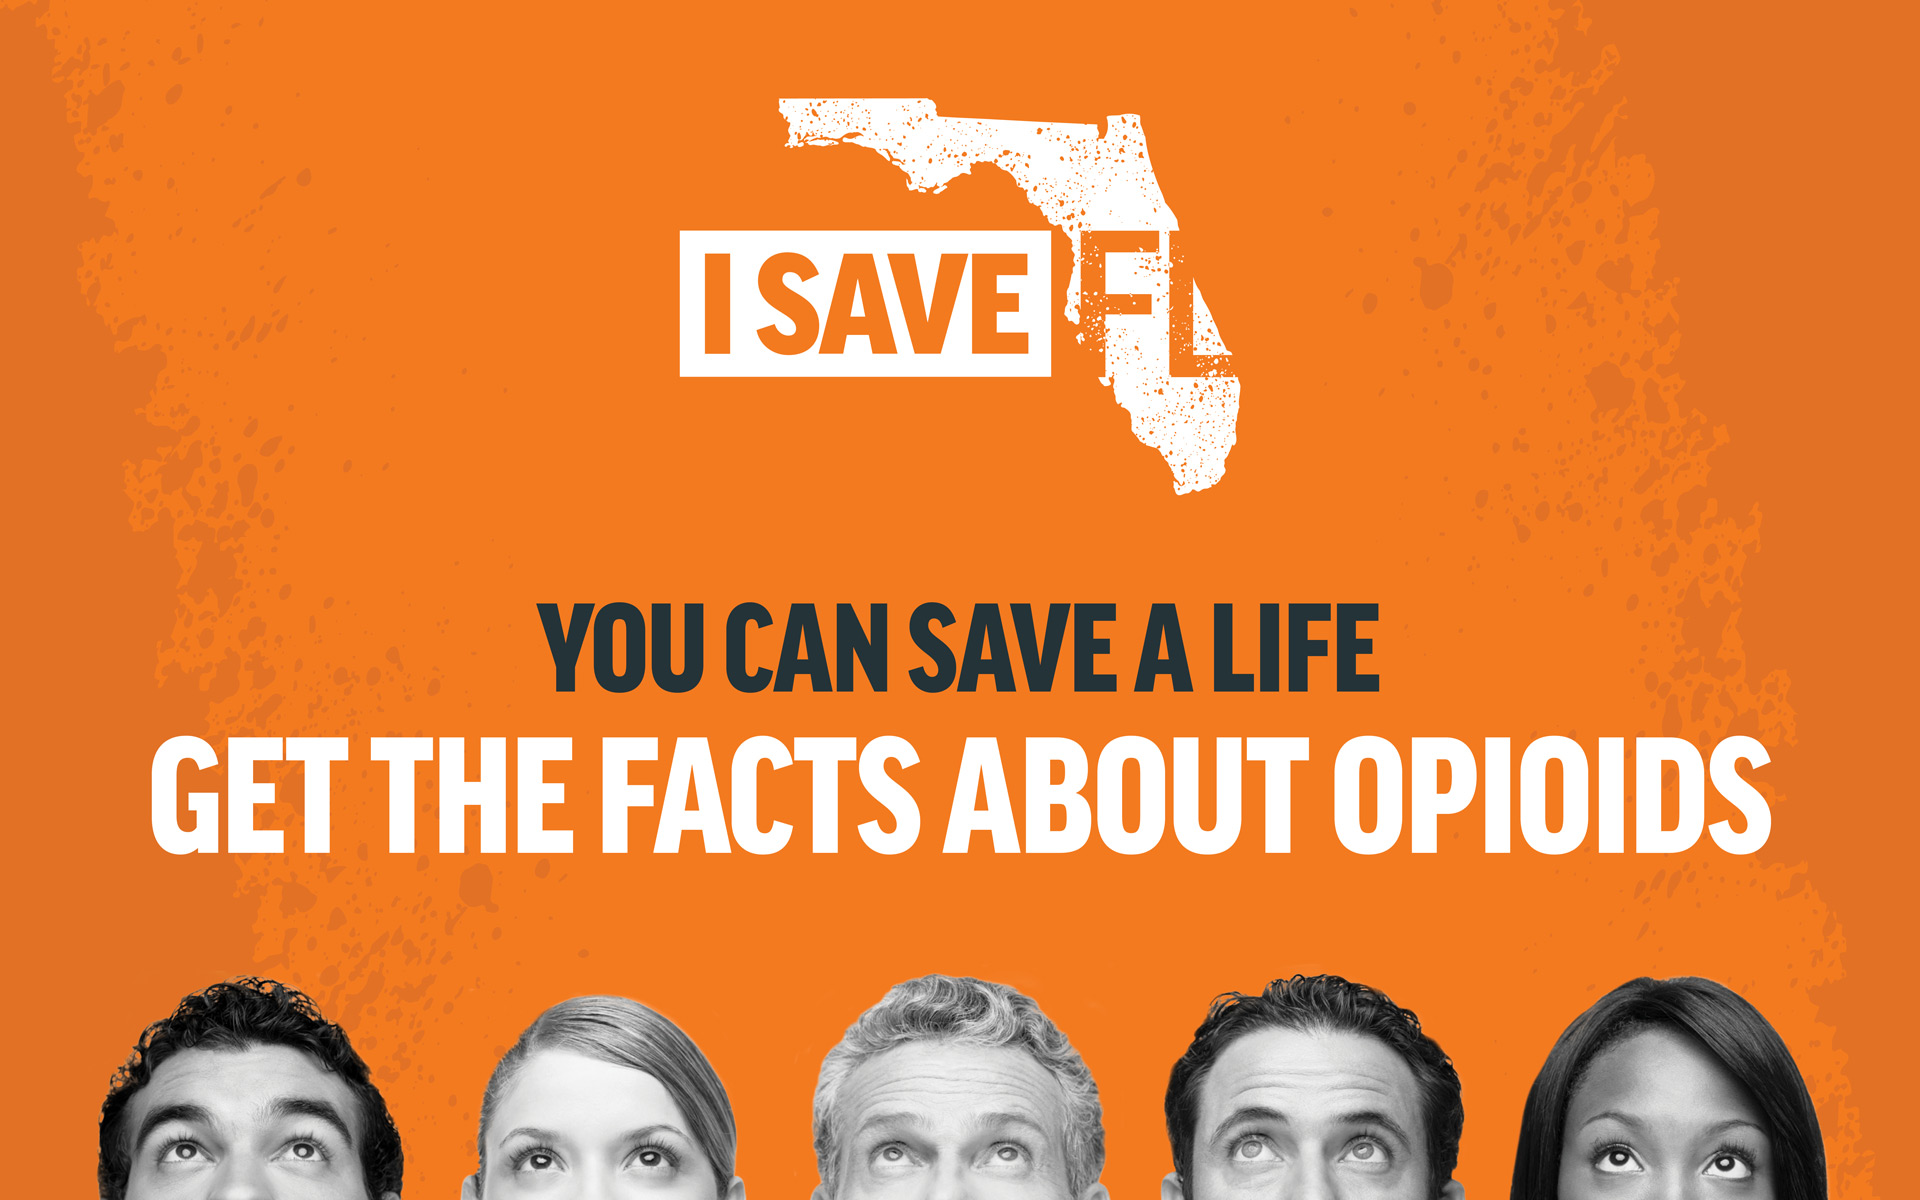 I Save FL.  You can save a life.  Get the facts about opioids